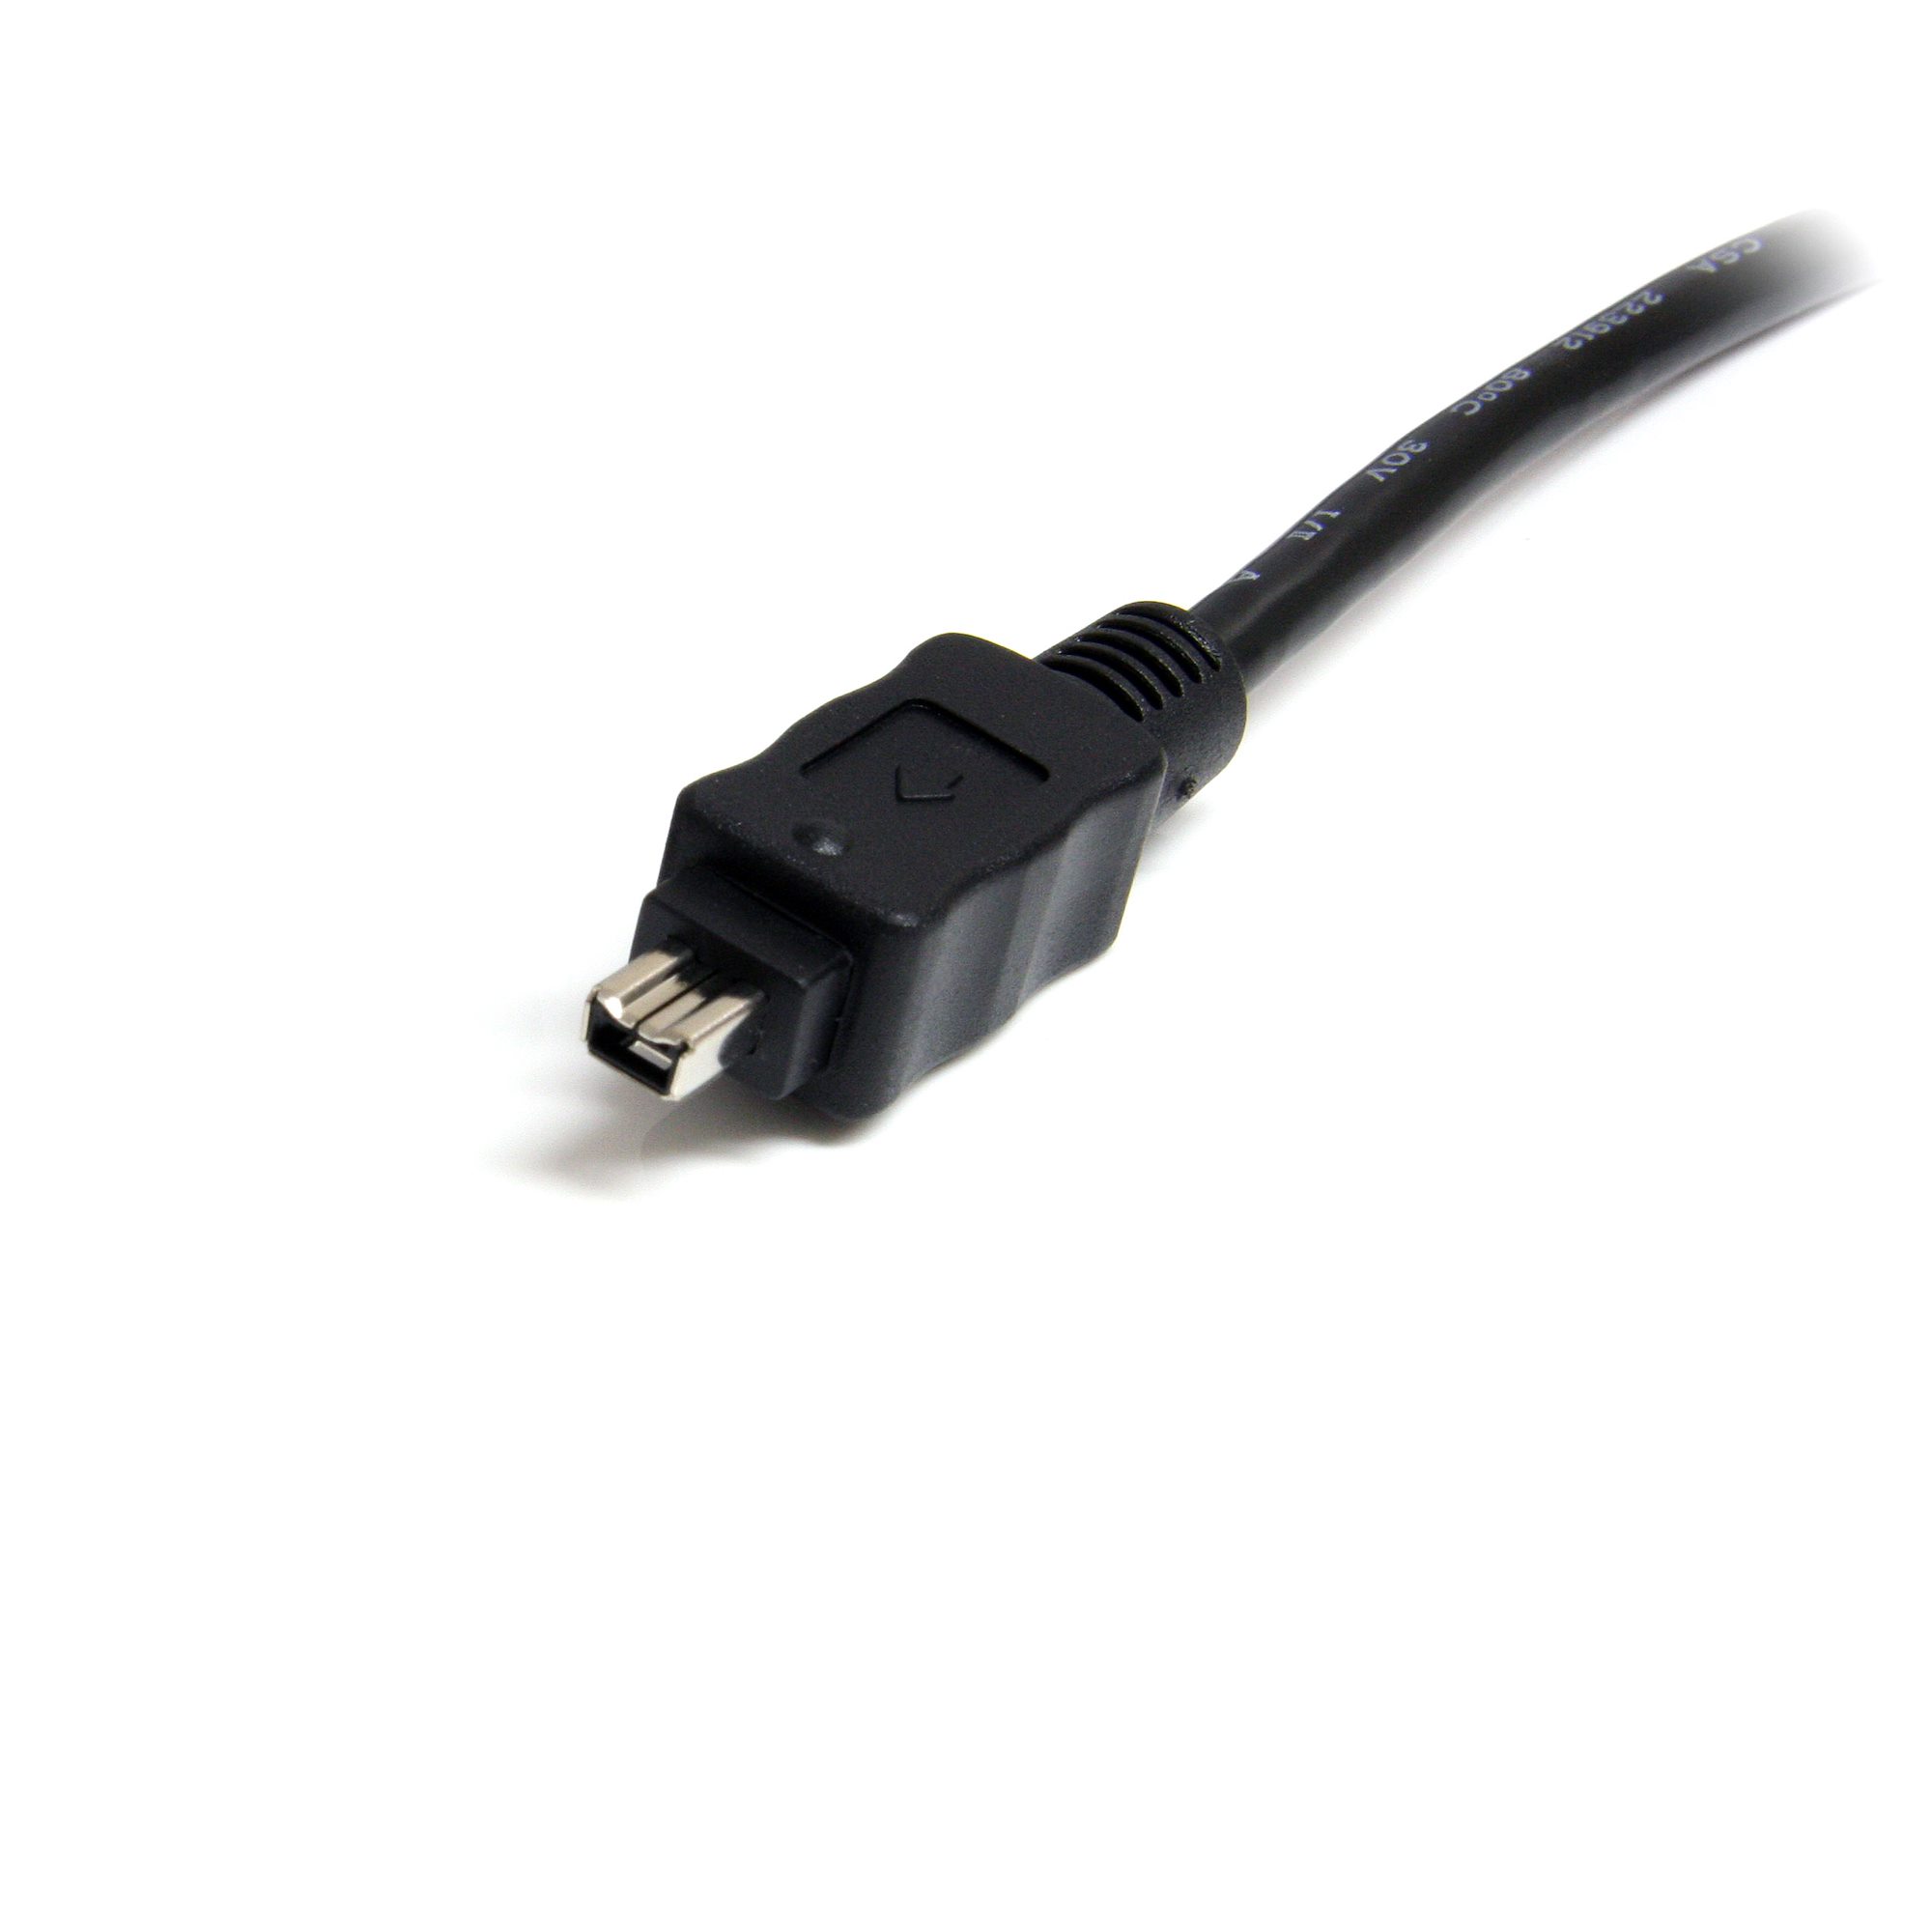 firewire 400 to usb adapter